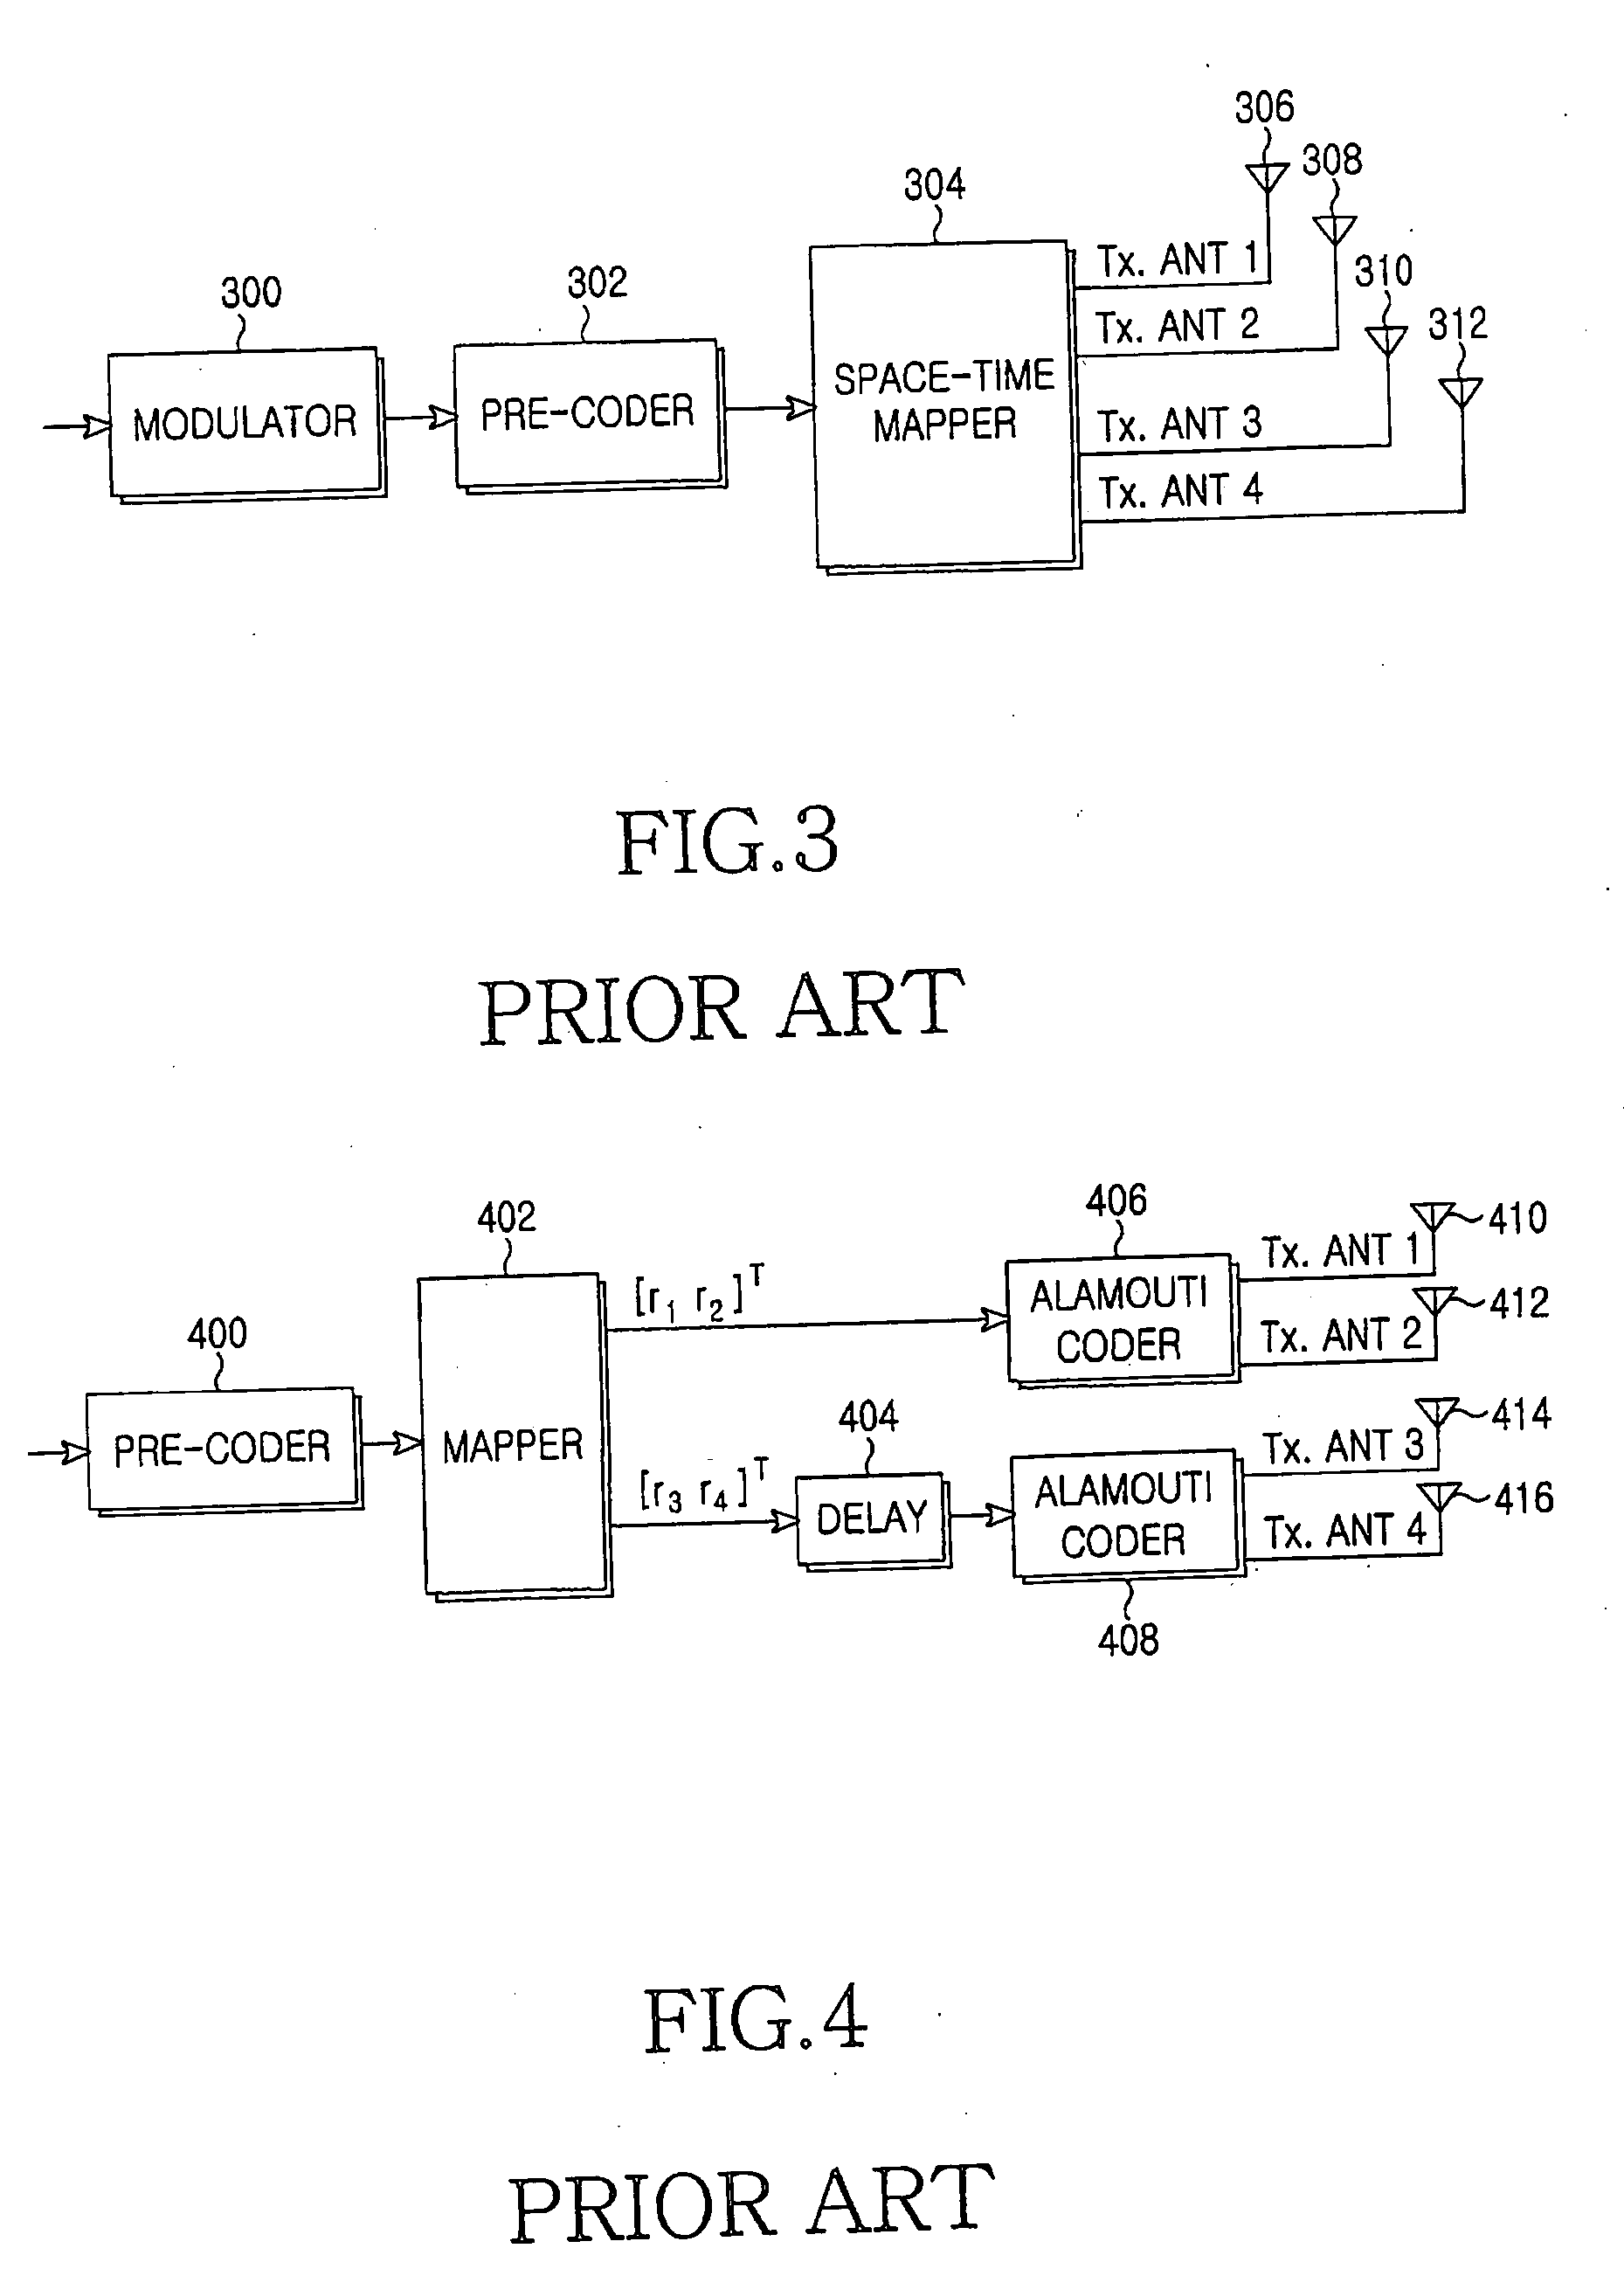 Apparatus and method for full-diversity, full-rate space-time block coding for even number of transmit antennas